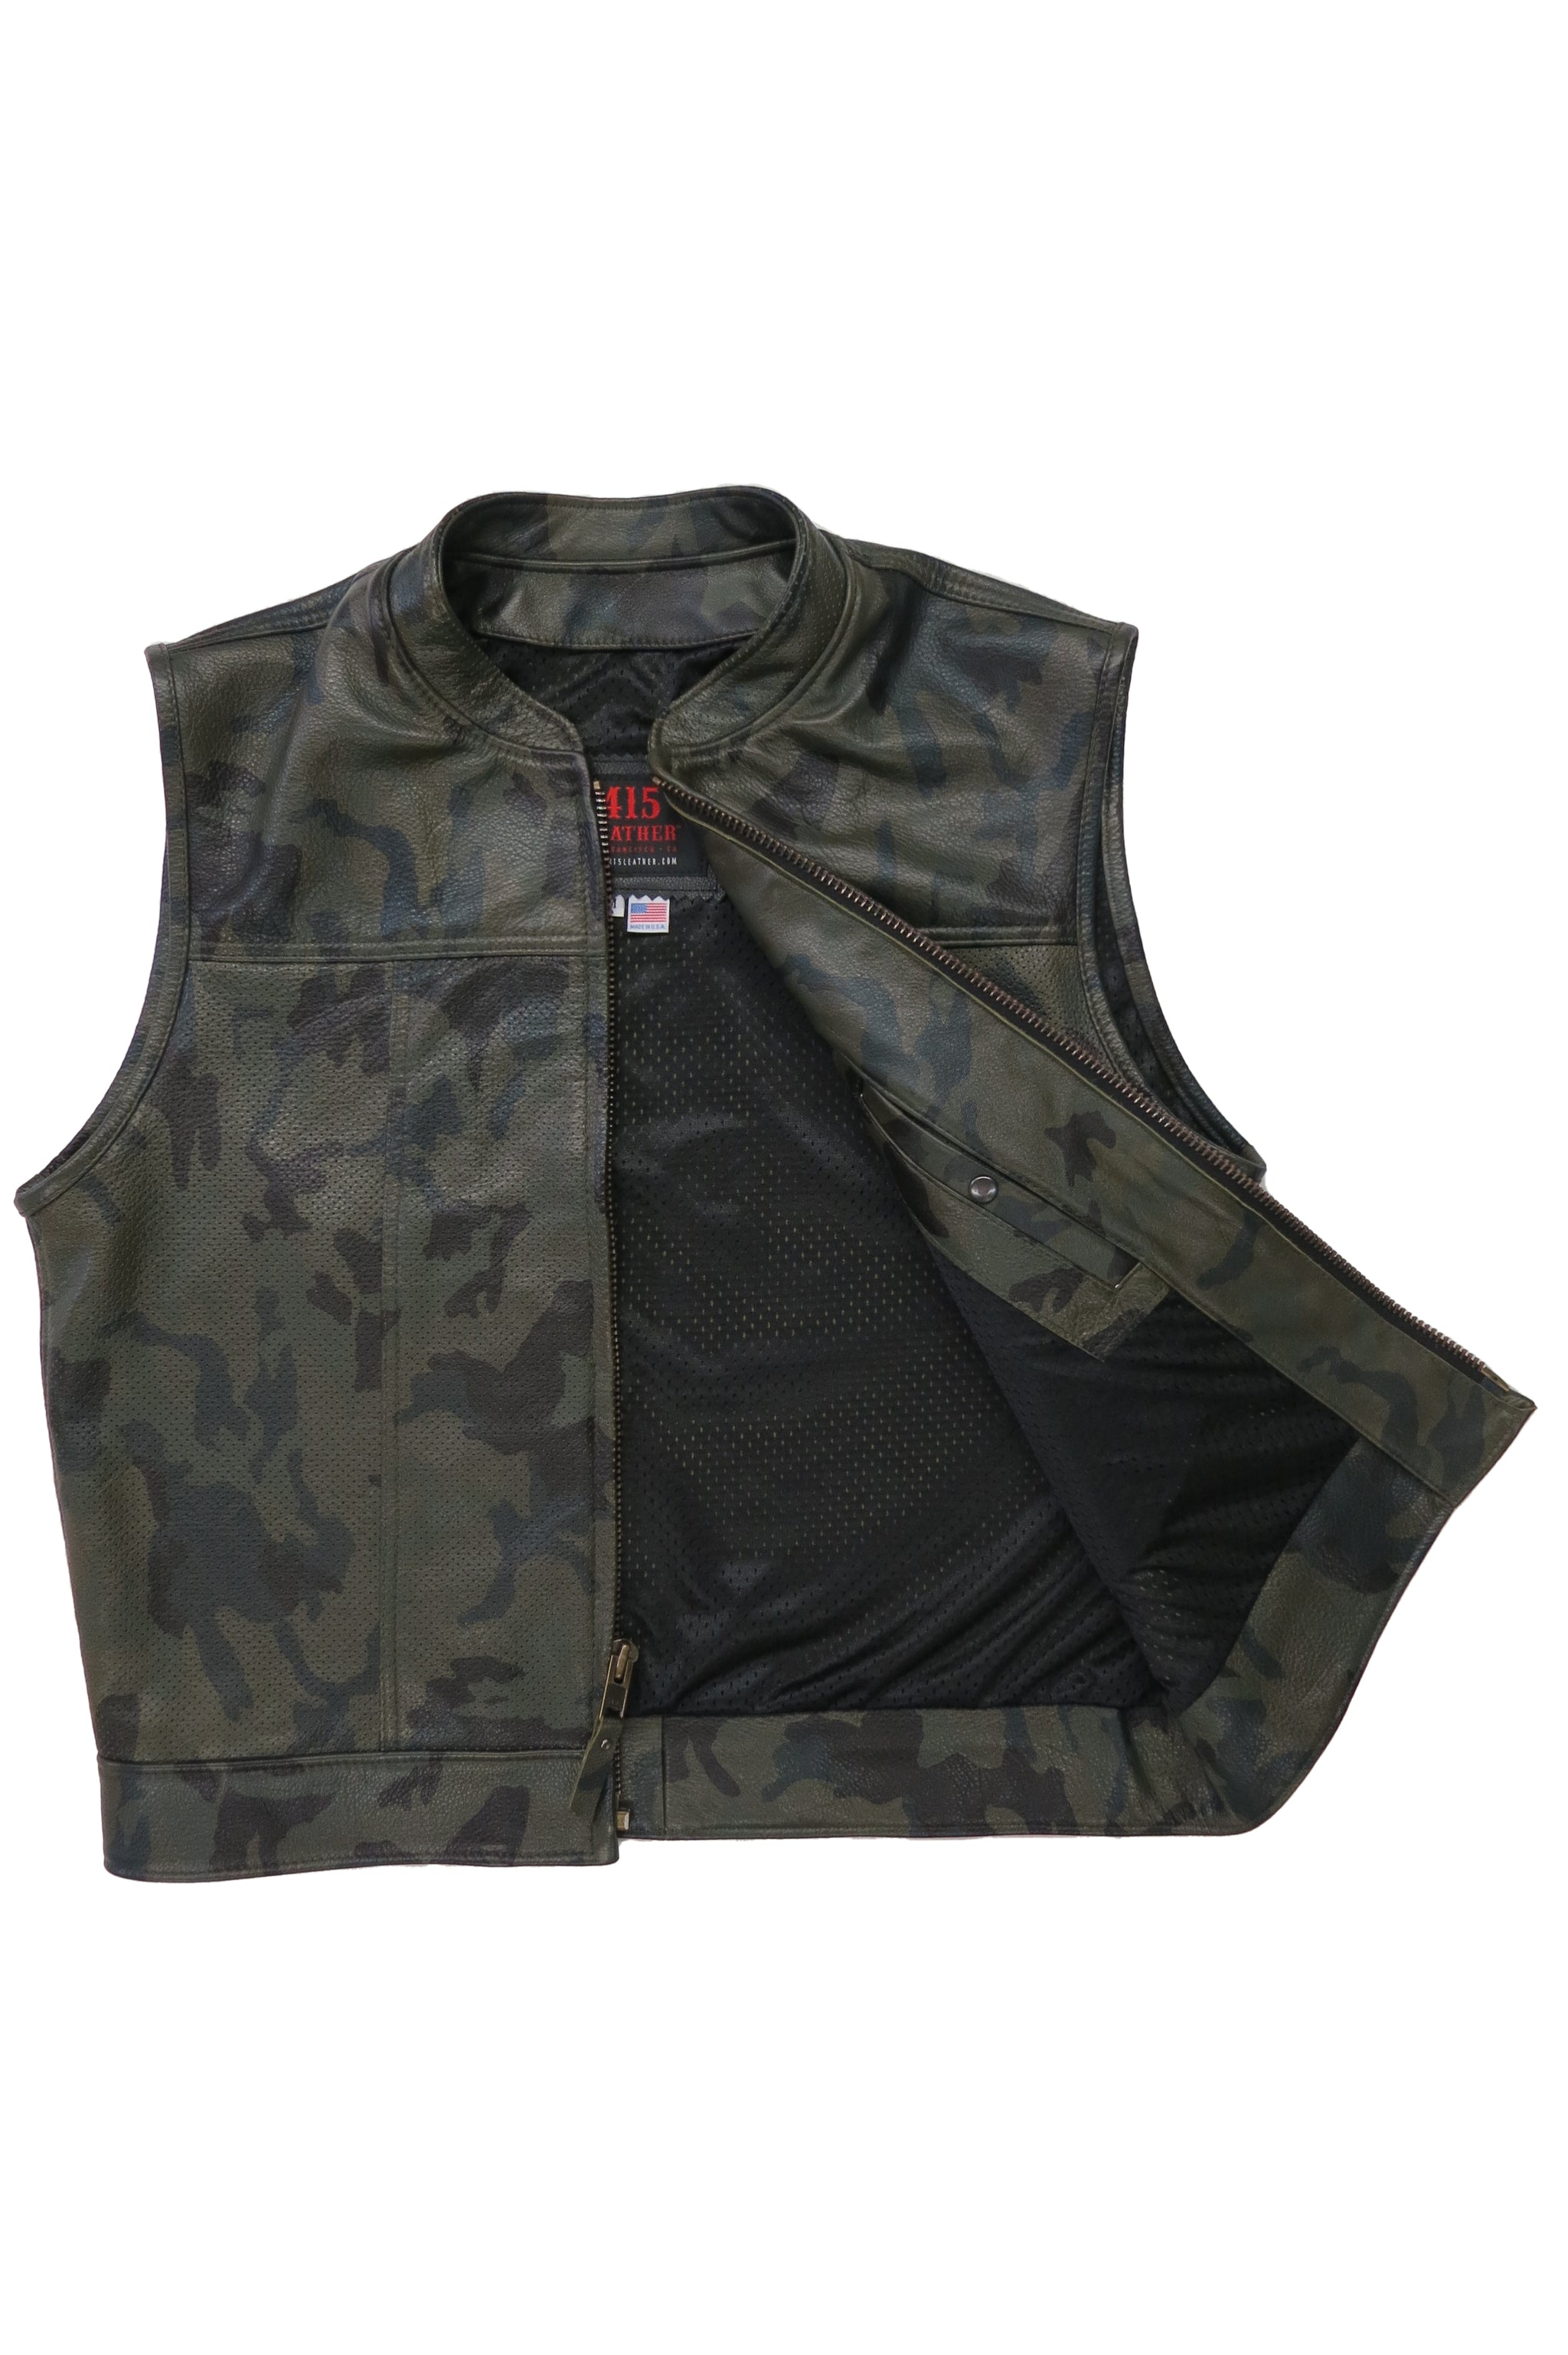 Leather Perforated Camouflage Zipper - 415 Clothing,